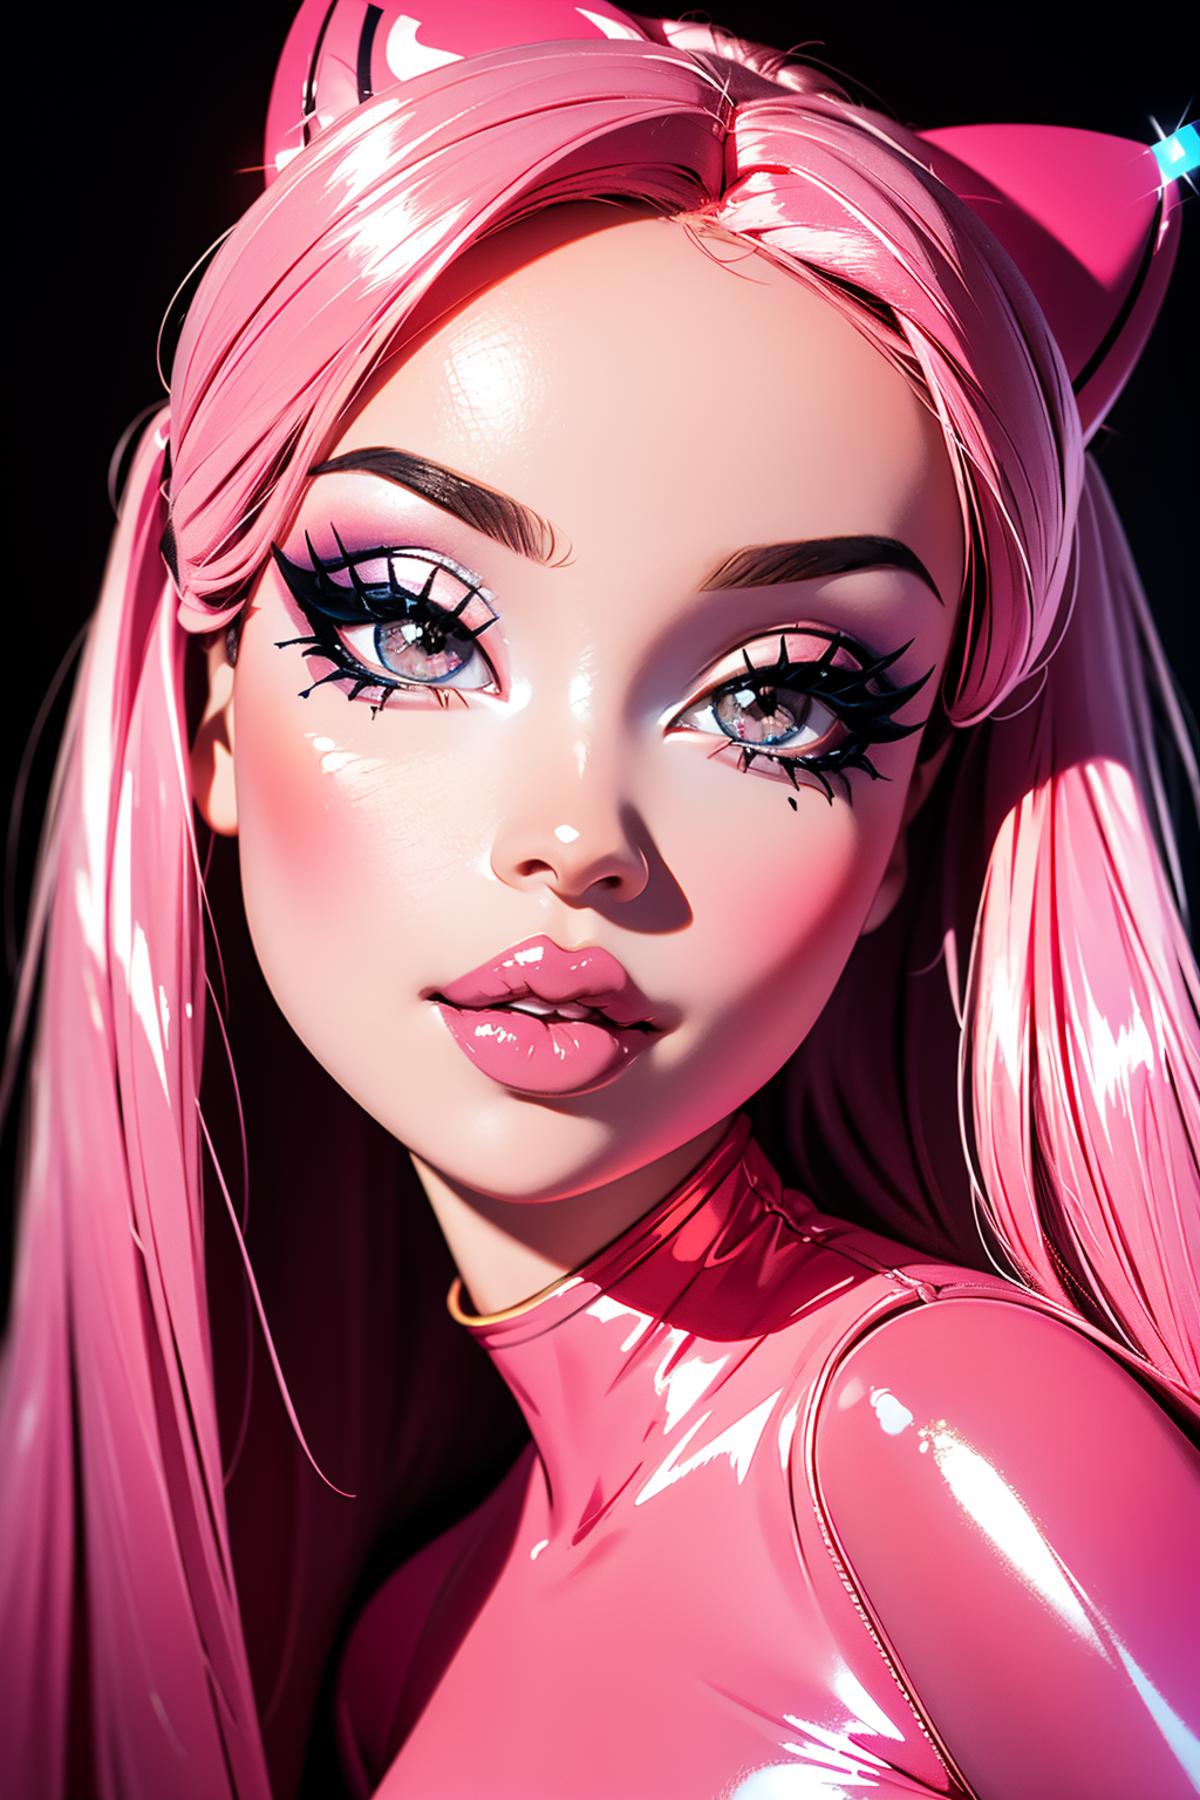 E-Girl Makeup image by RubberDuckie